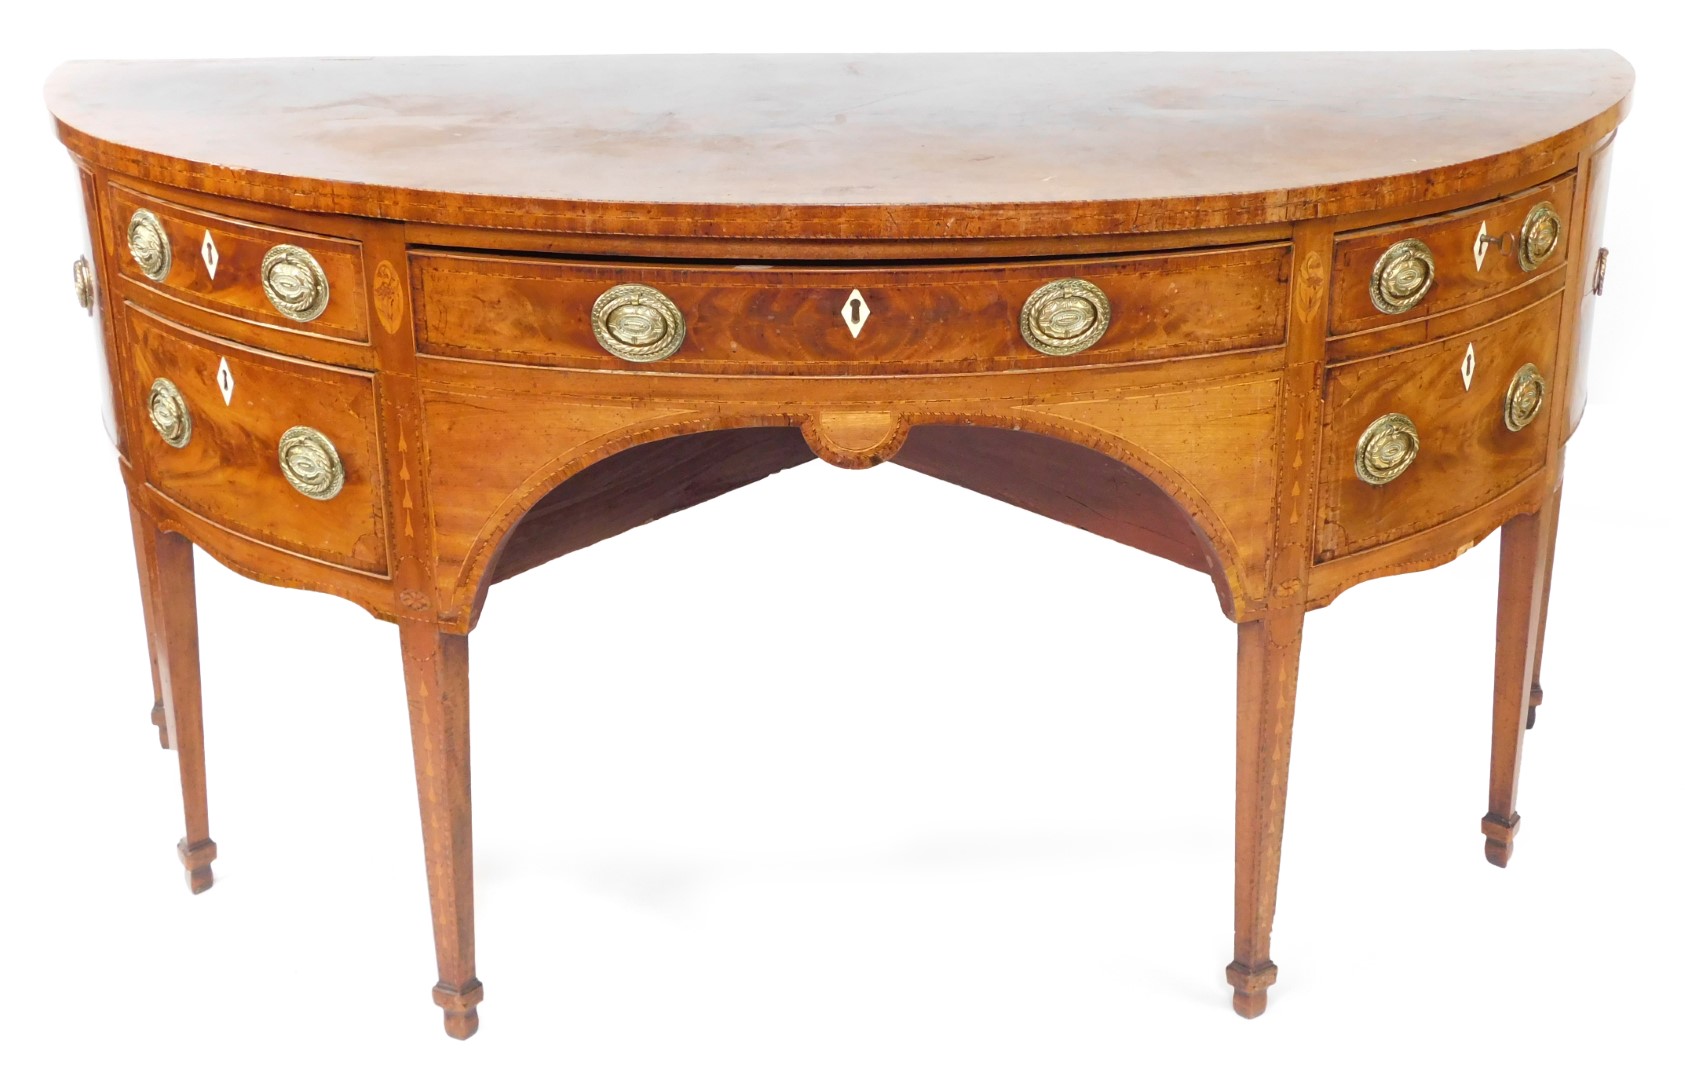 A George III mahogany demi lune sideboard, with cross banded and line inlaid top, an arrangement of